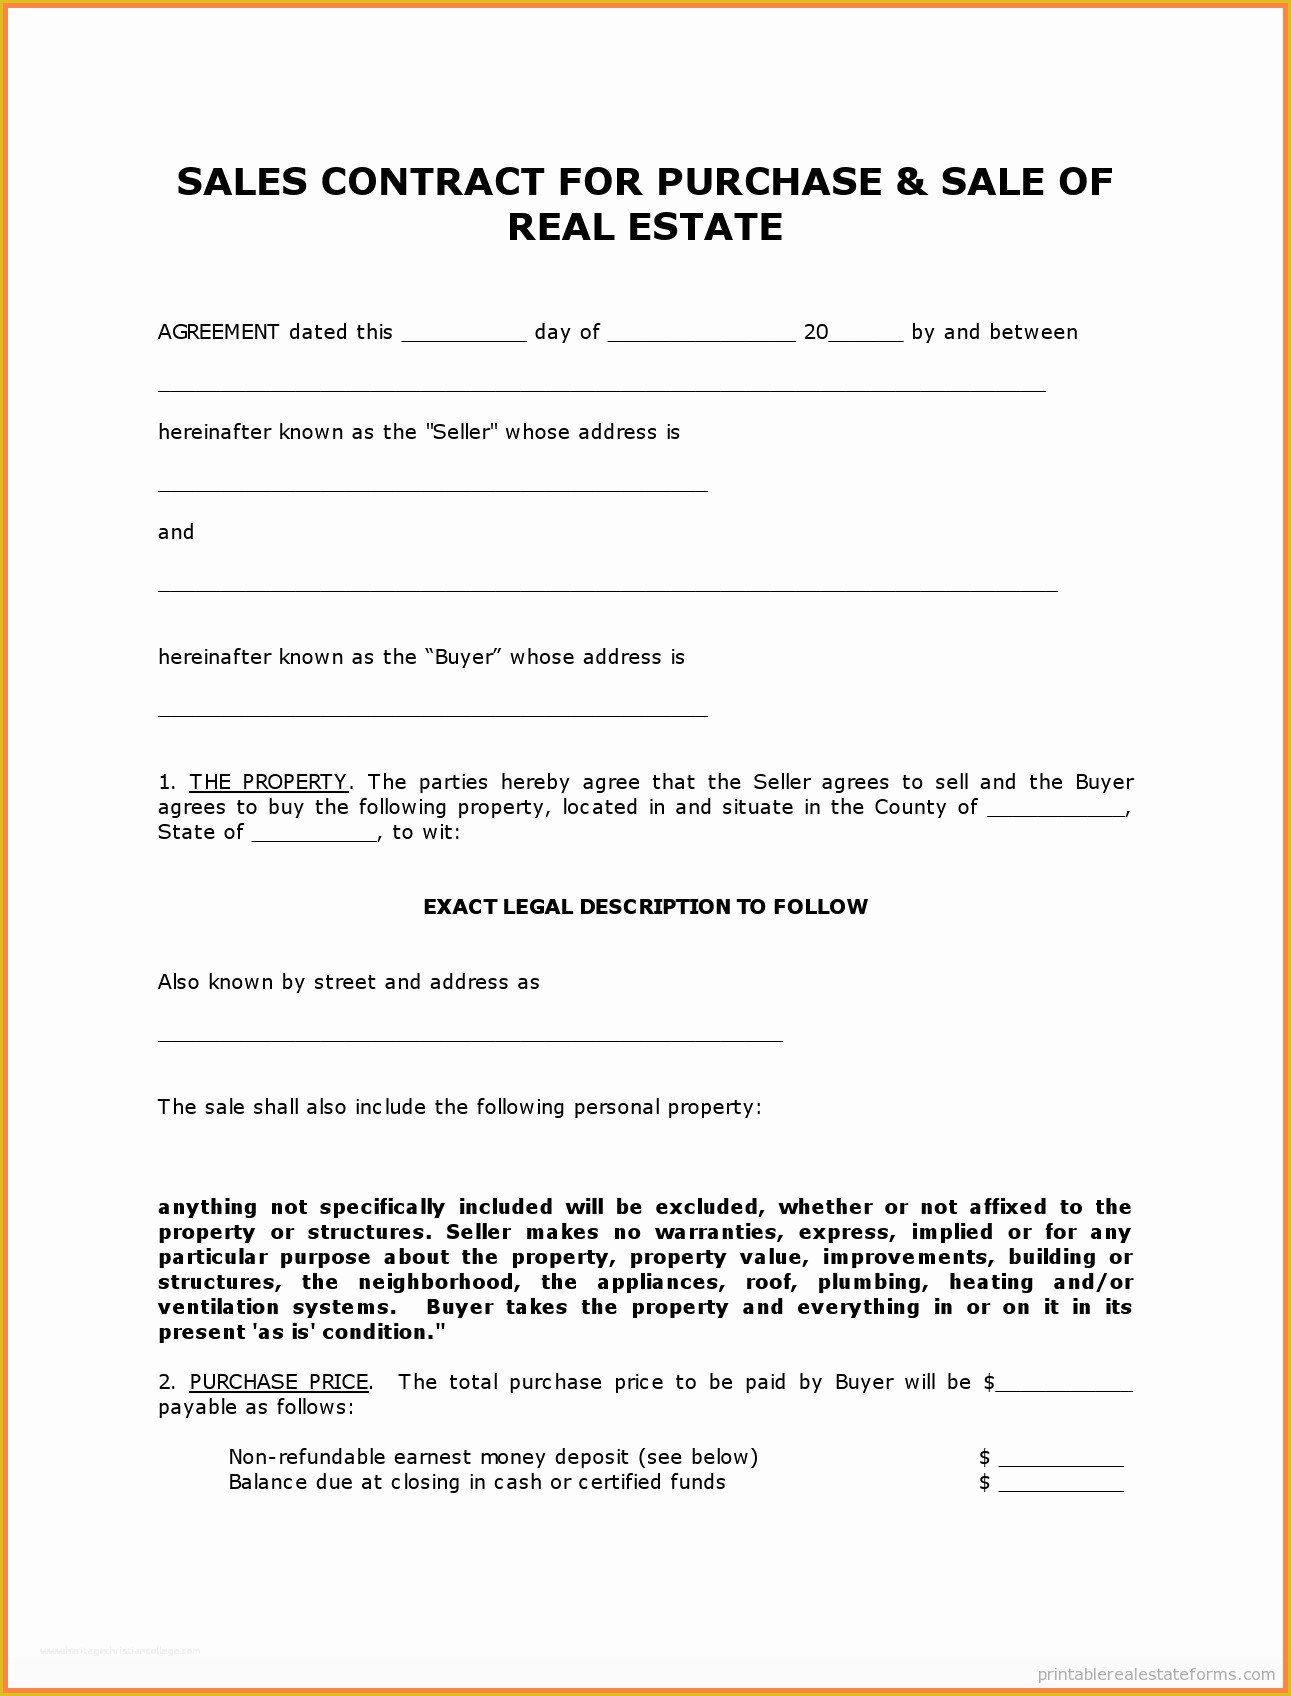 Free Home Sale Contract Template Of 4 for Sale by Owner Purchase Agreement form